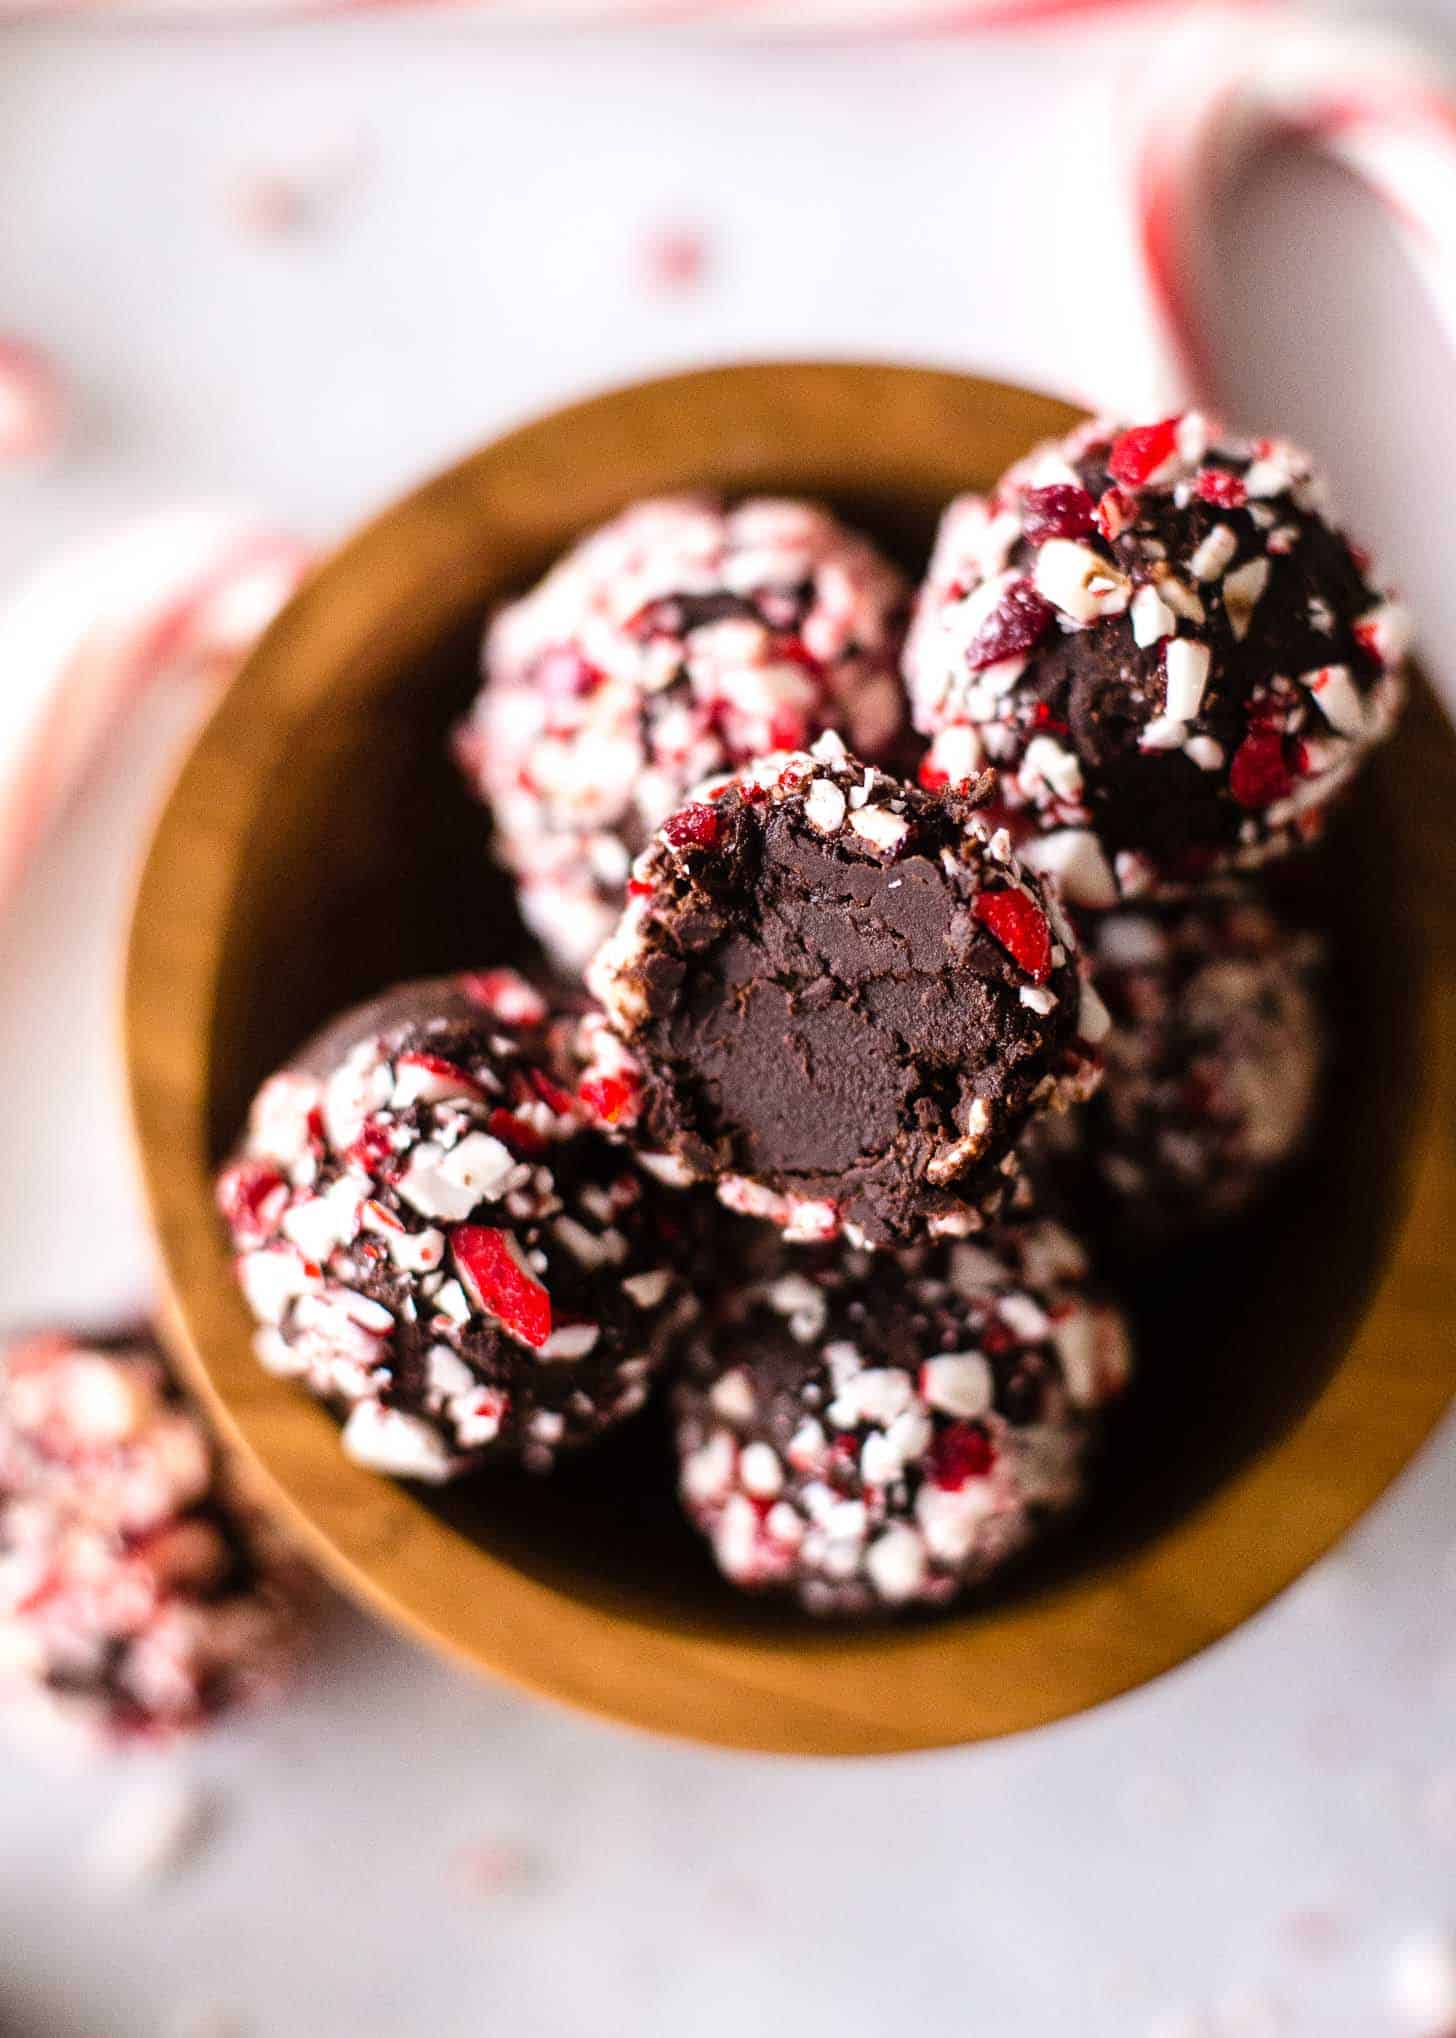 Chocolate Candy Cane Truffles in a small wooden bowl